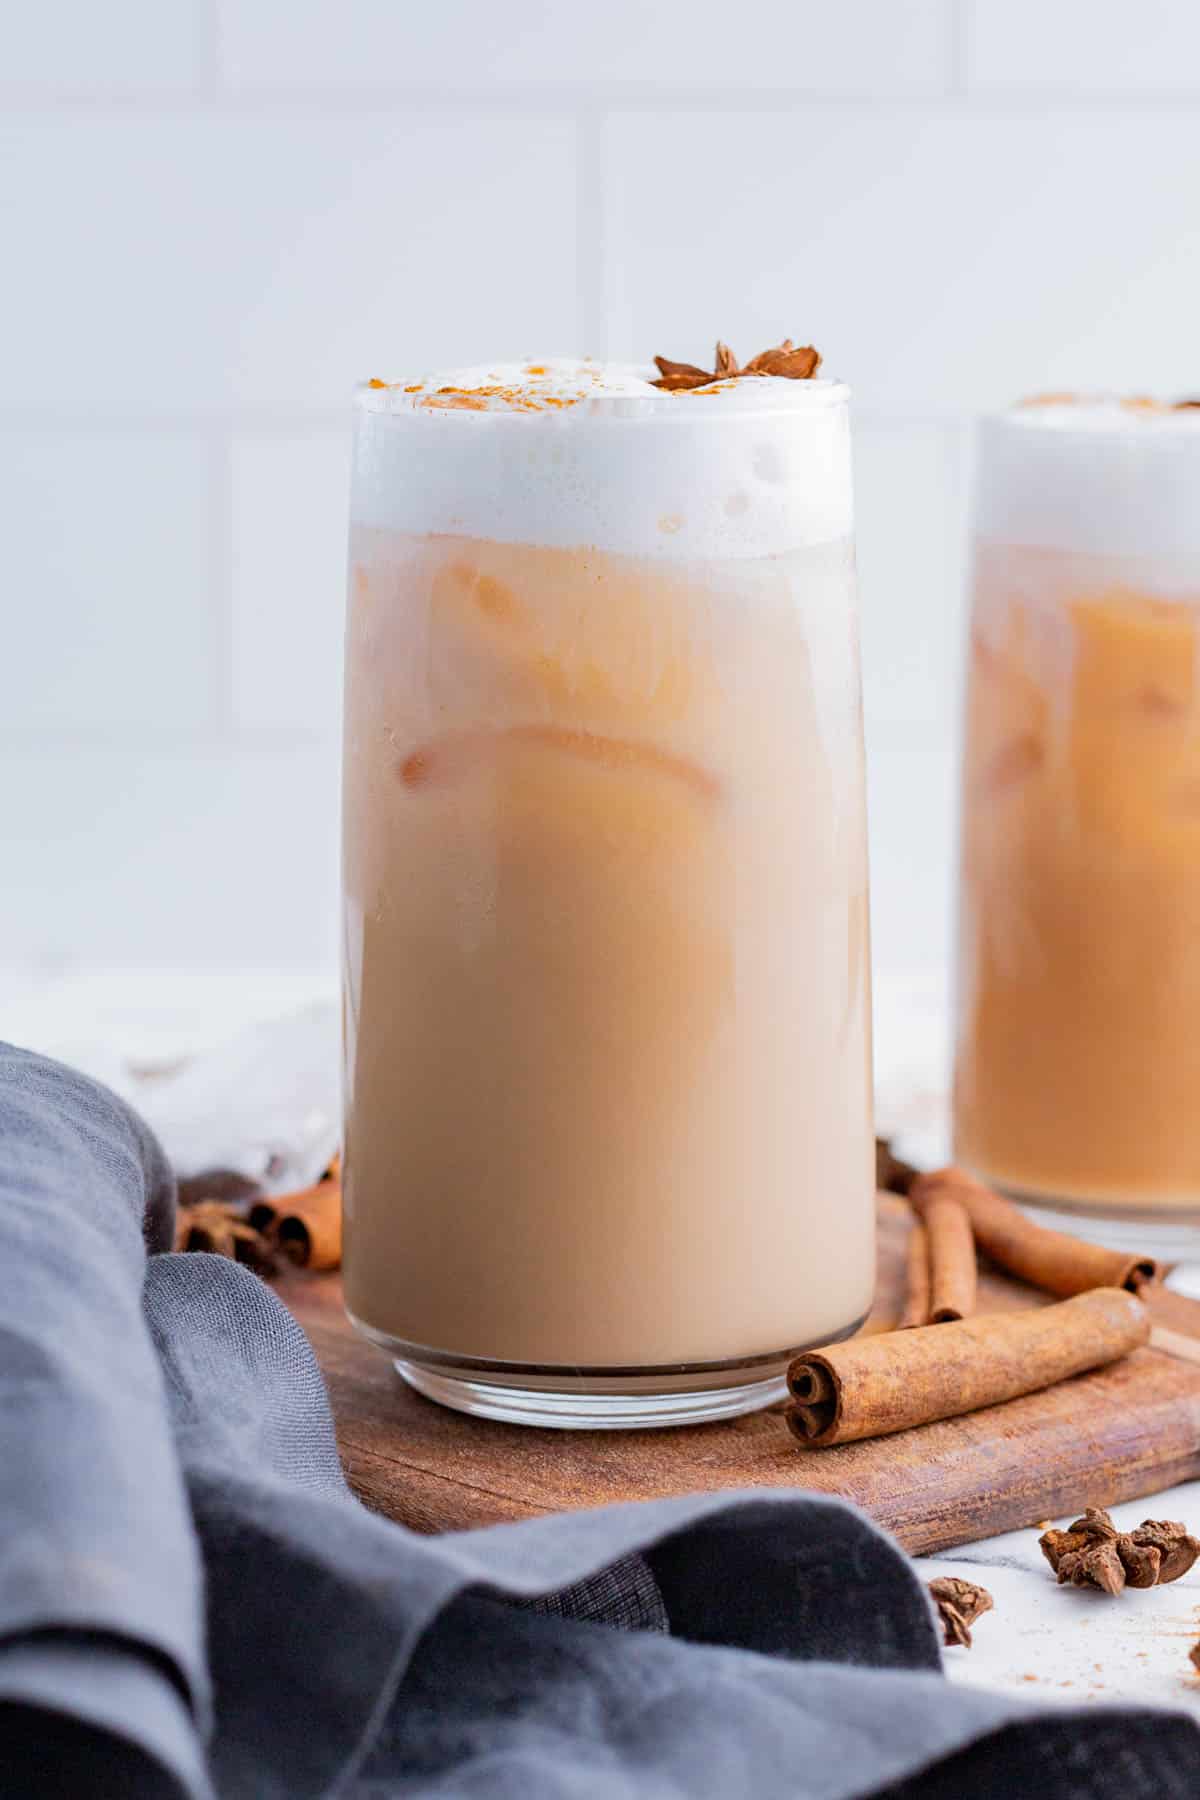 Two glasses of iced chai tea are served with warm spices.